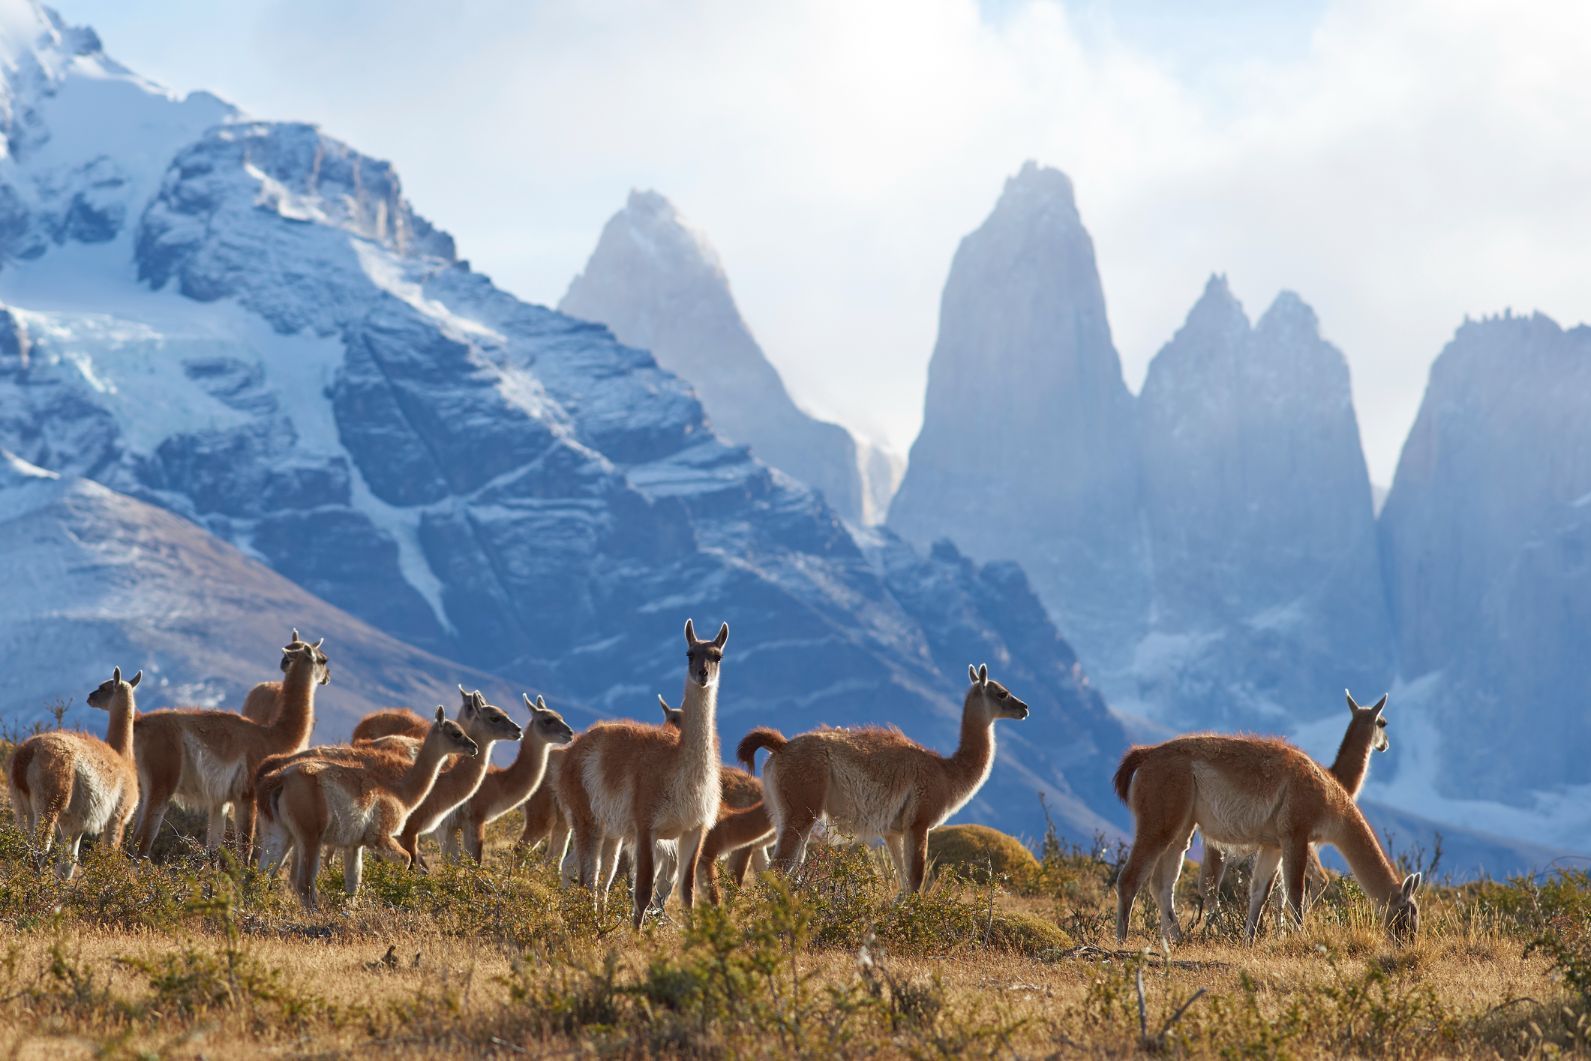 A herd of guanacos grazing in front of the pointed peaks of Patagonia. Photo: Getty